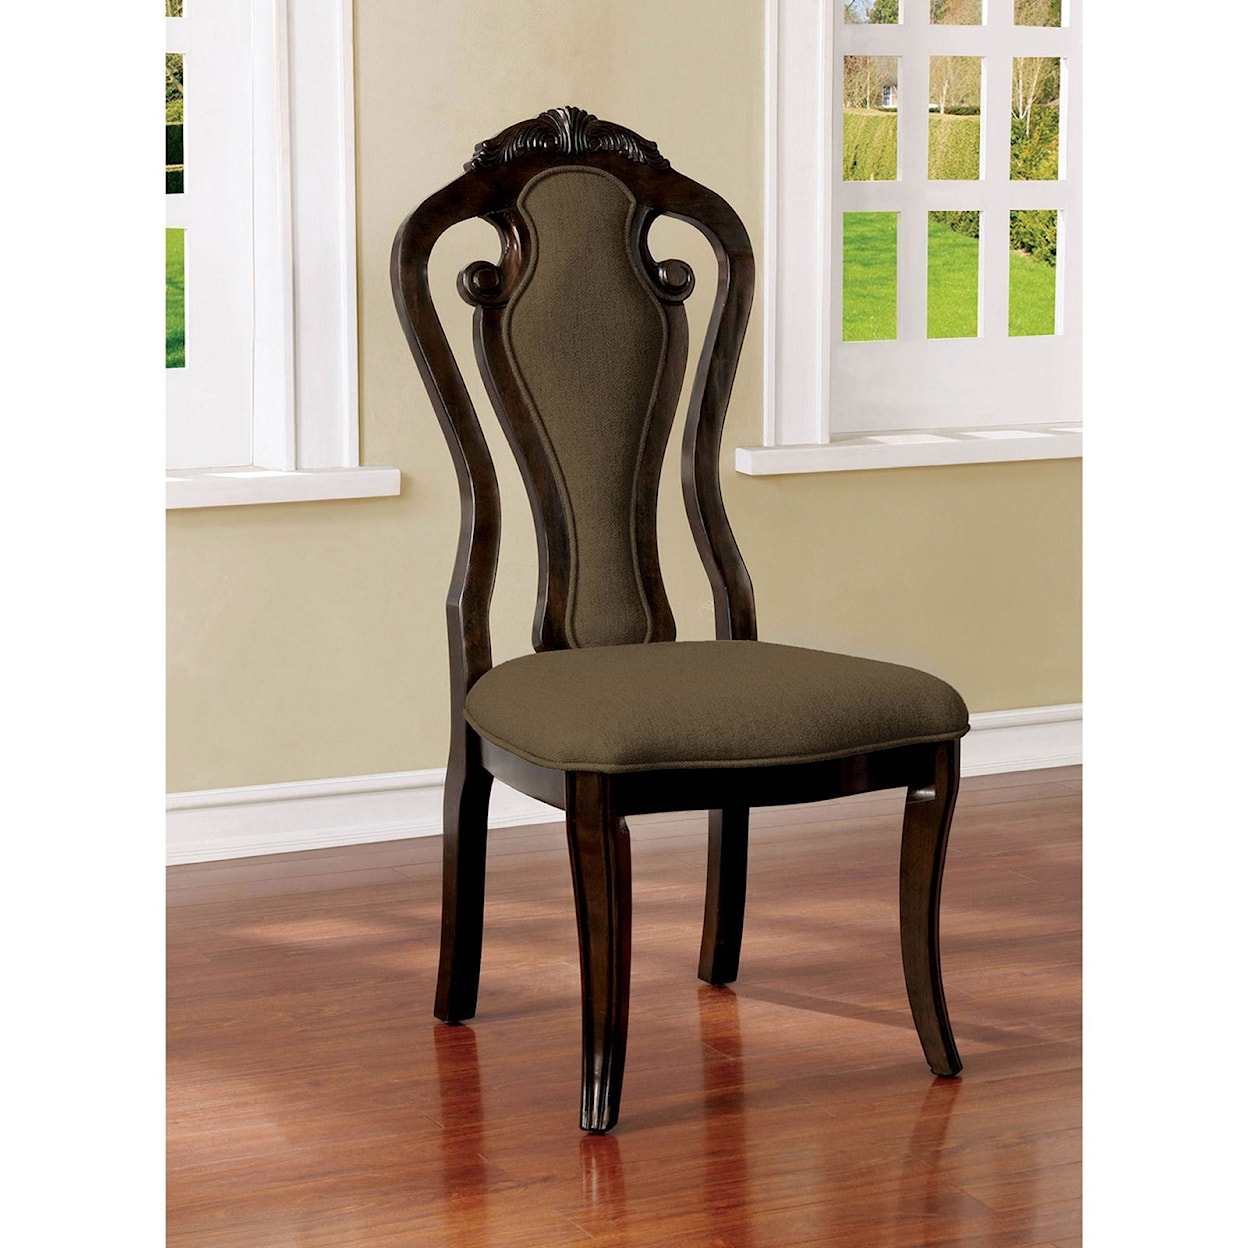 Furniture of America Rosalina Set of 2 Side Chairs